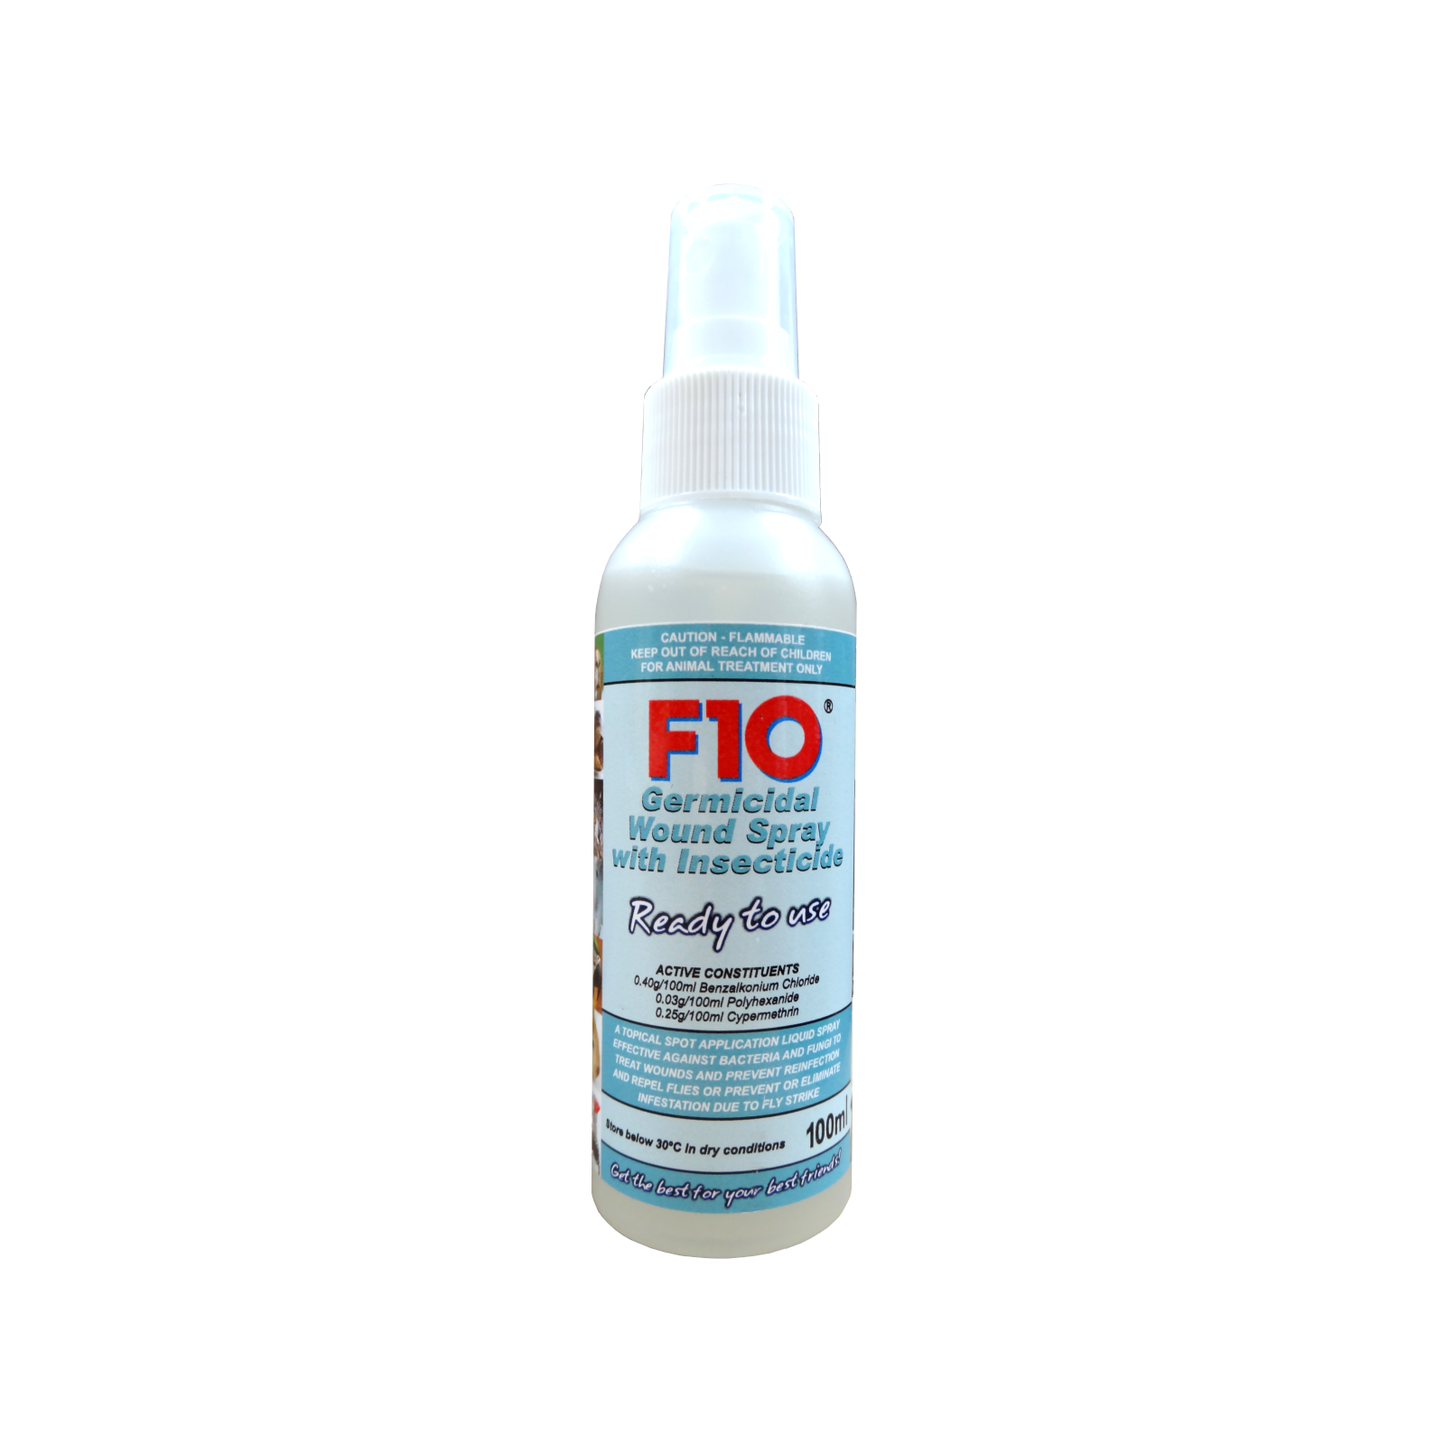 A 100ml bottle of Germicidal Wound Spray with Insecticide